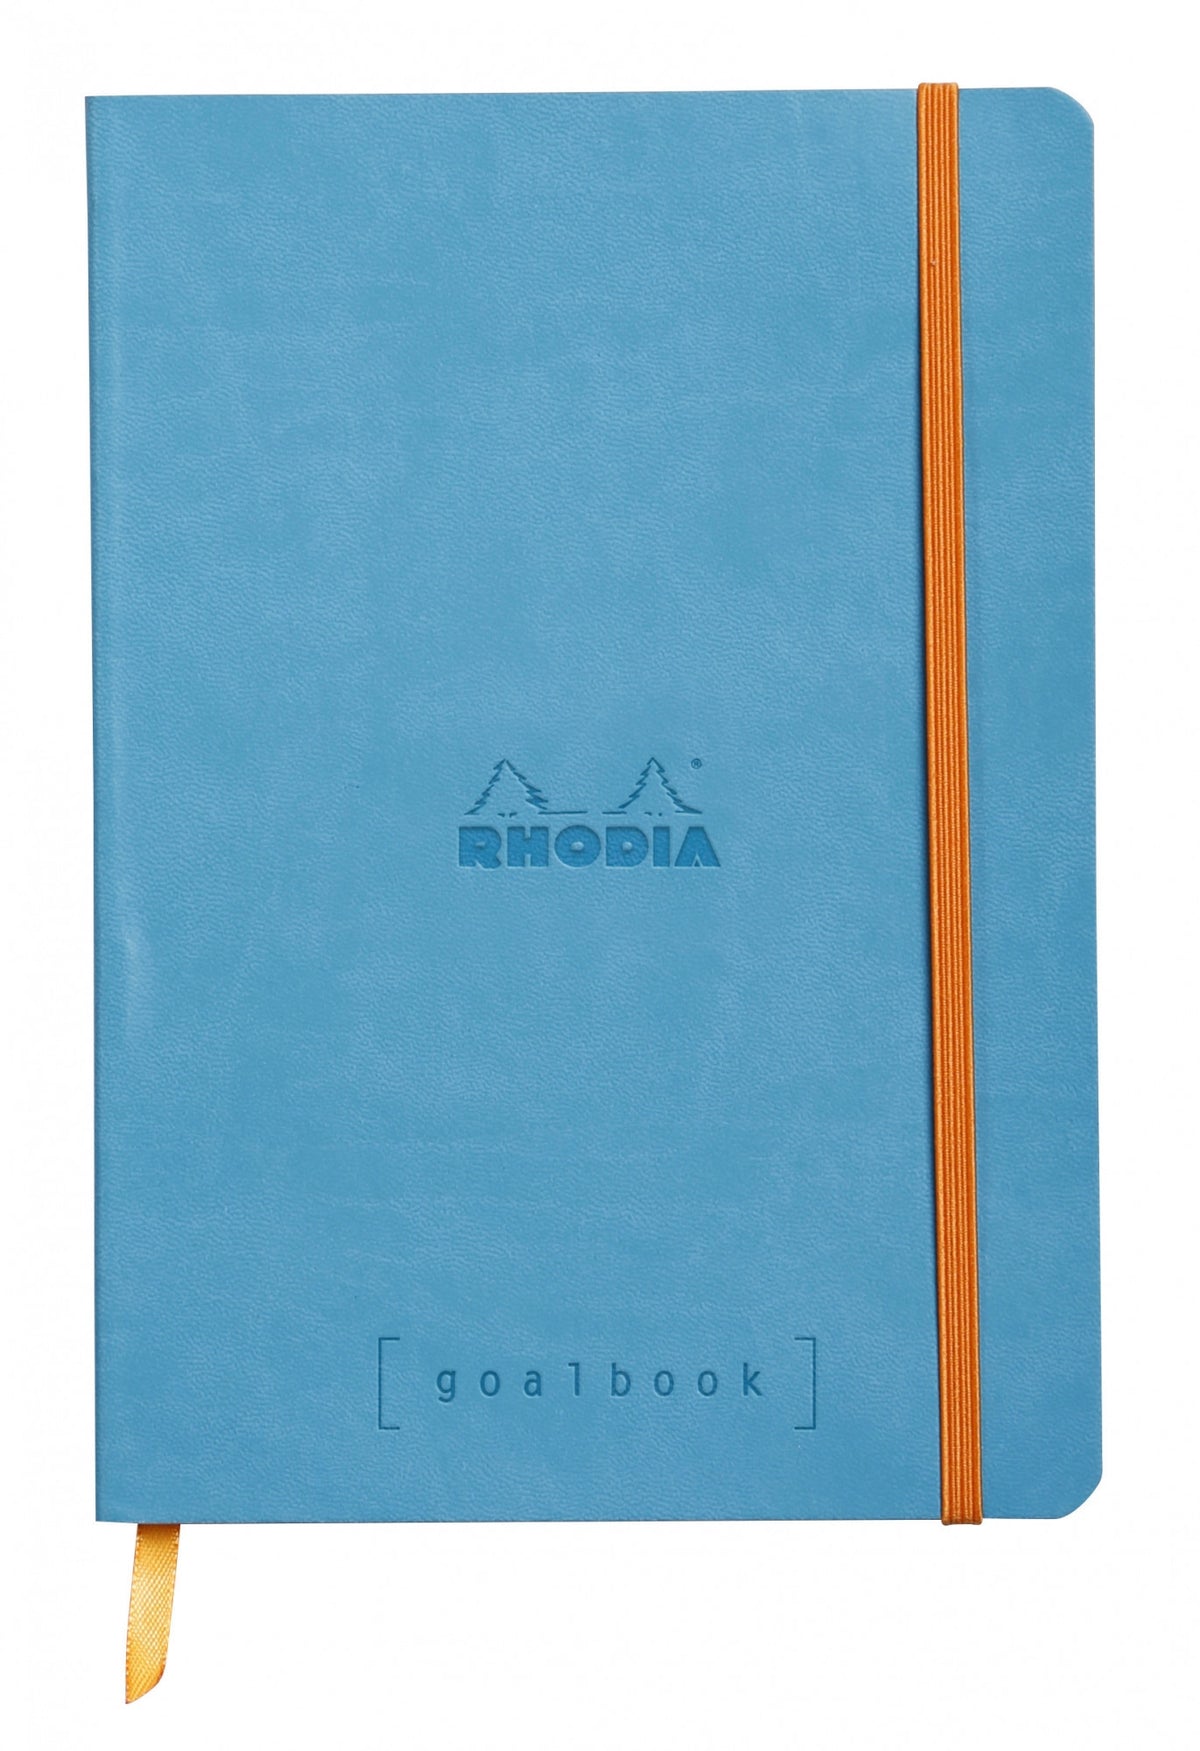 Rhodia Goalbook Softcover A5 - Turquoise